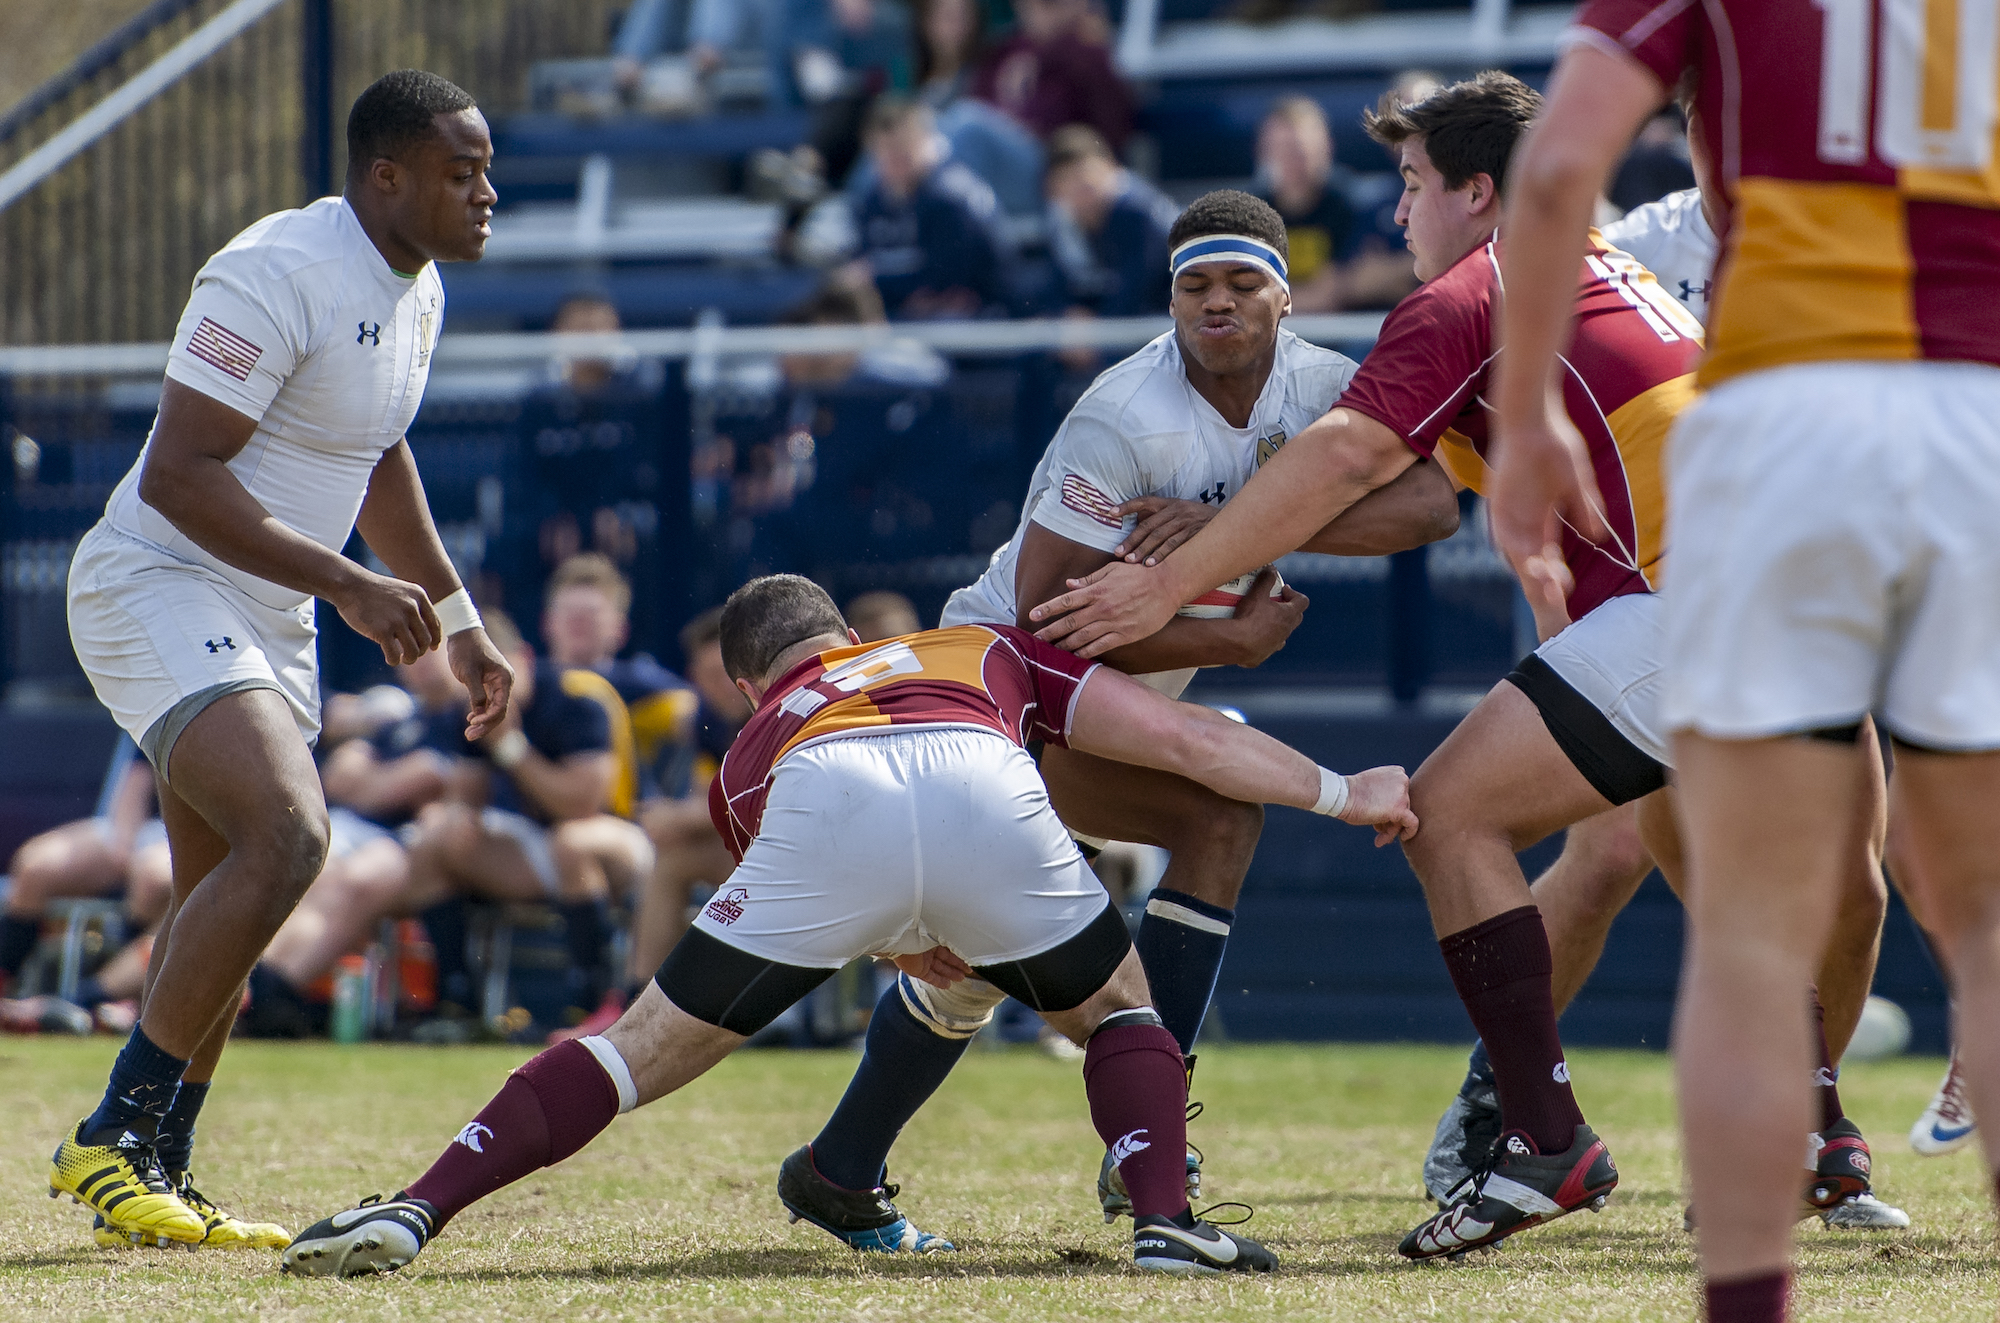 Navy v Boston College rugby in the 2017 Varsity Cup. Colleen McCloskey photo for Goff Rugby Report.